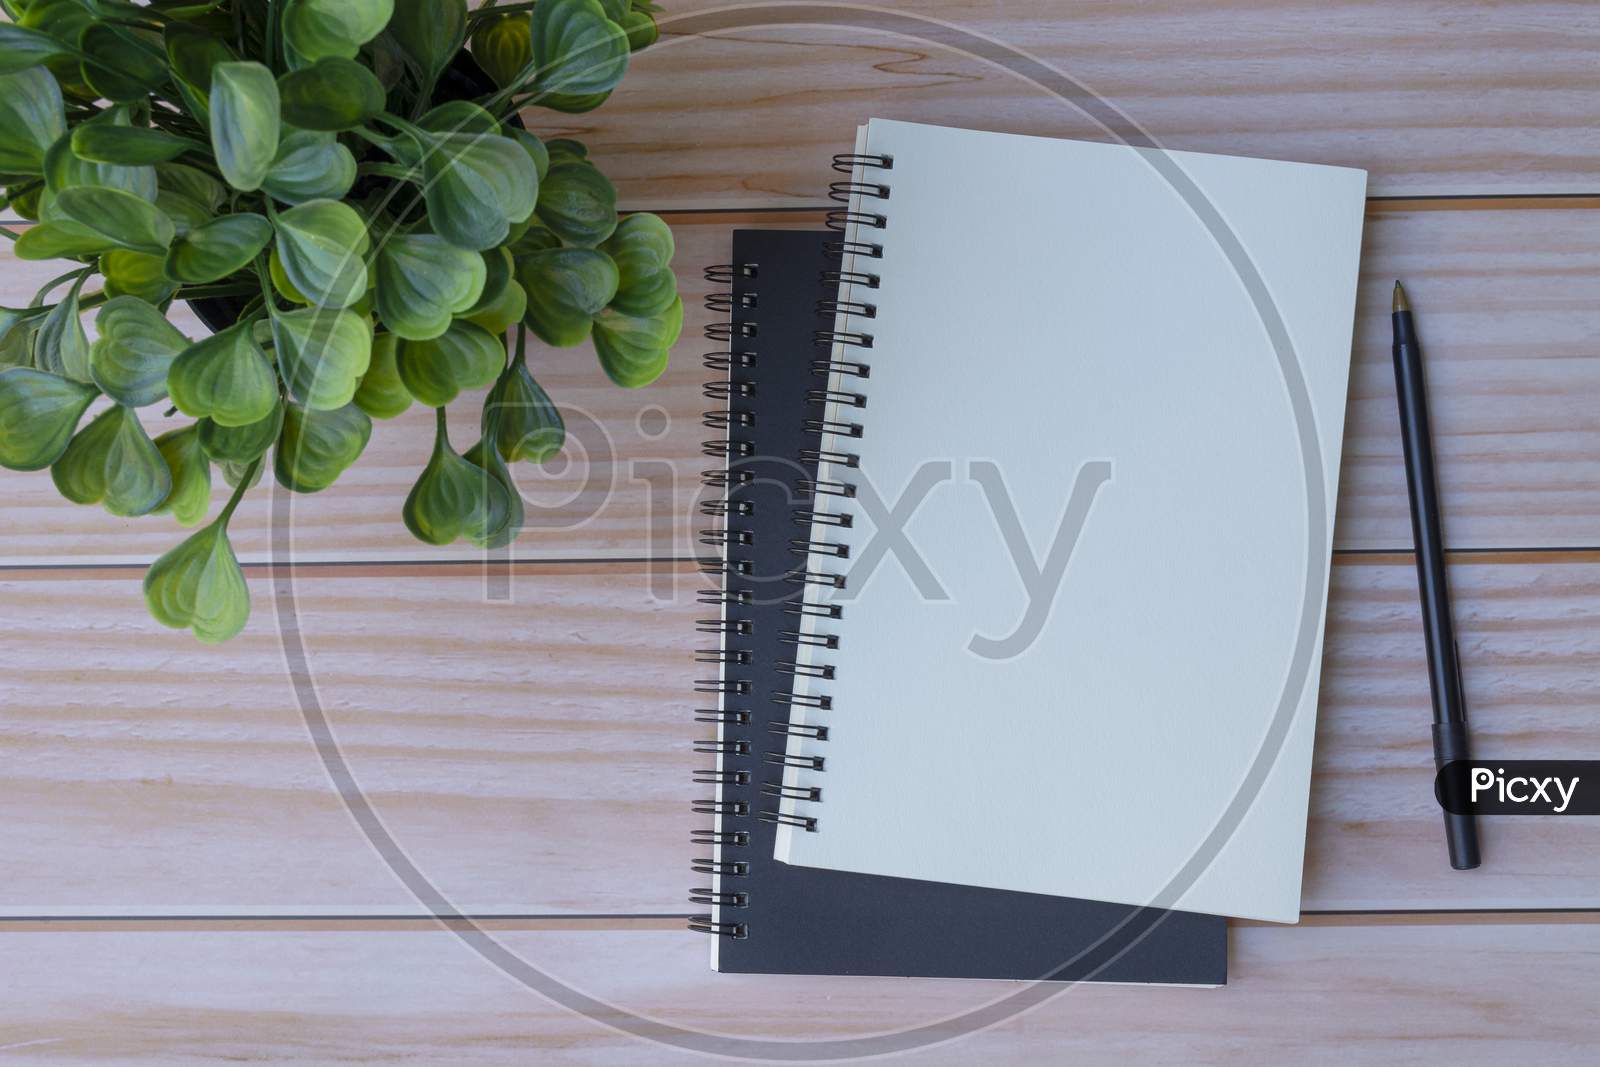 Note Book And Potted Plant On Wooden Table. Space For Text. Flat Lay, Top View